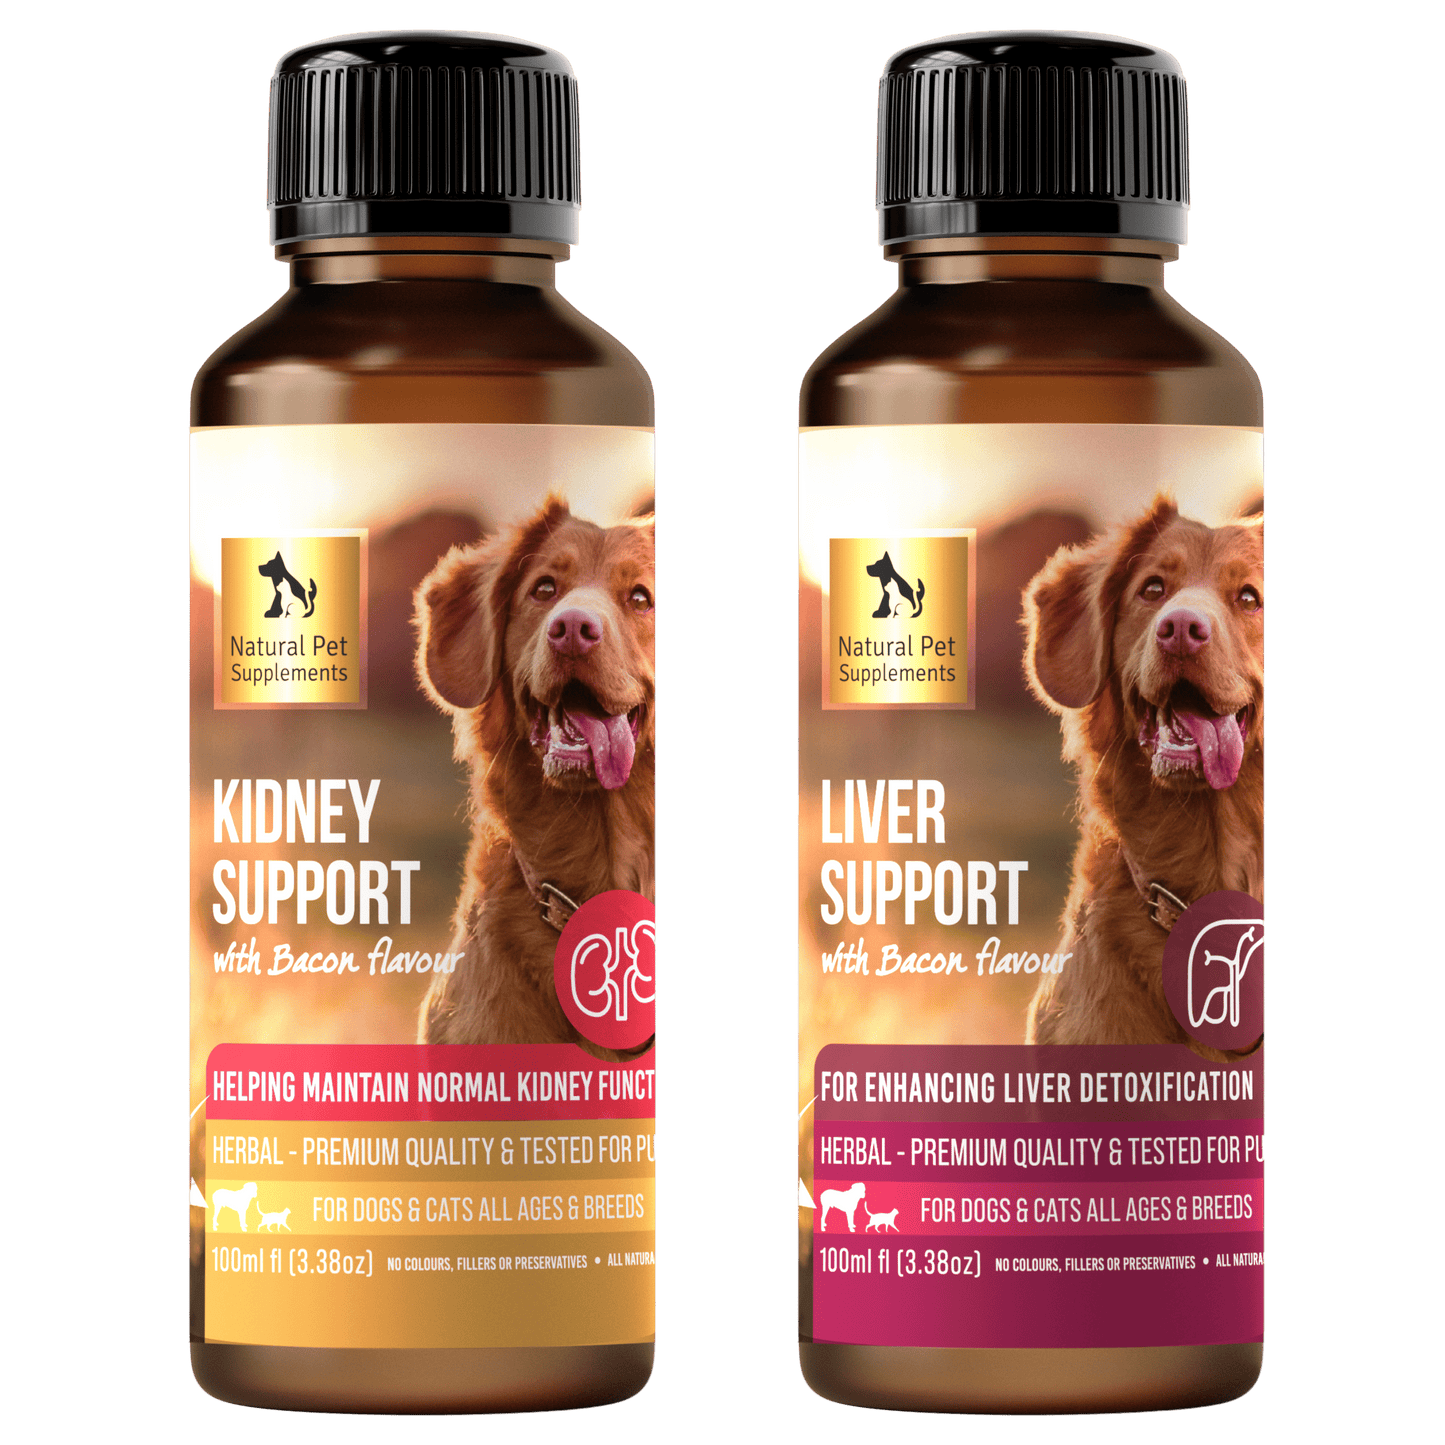 Kidney Support Kit for Dogs and Cats